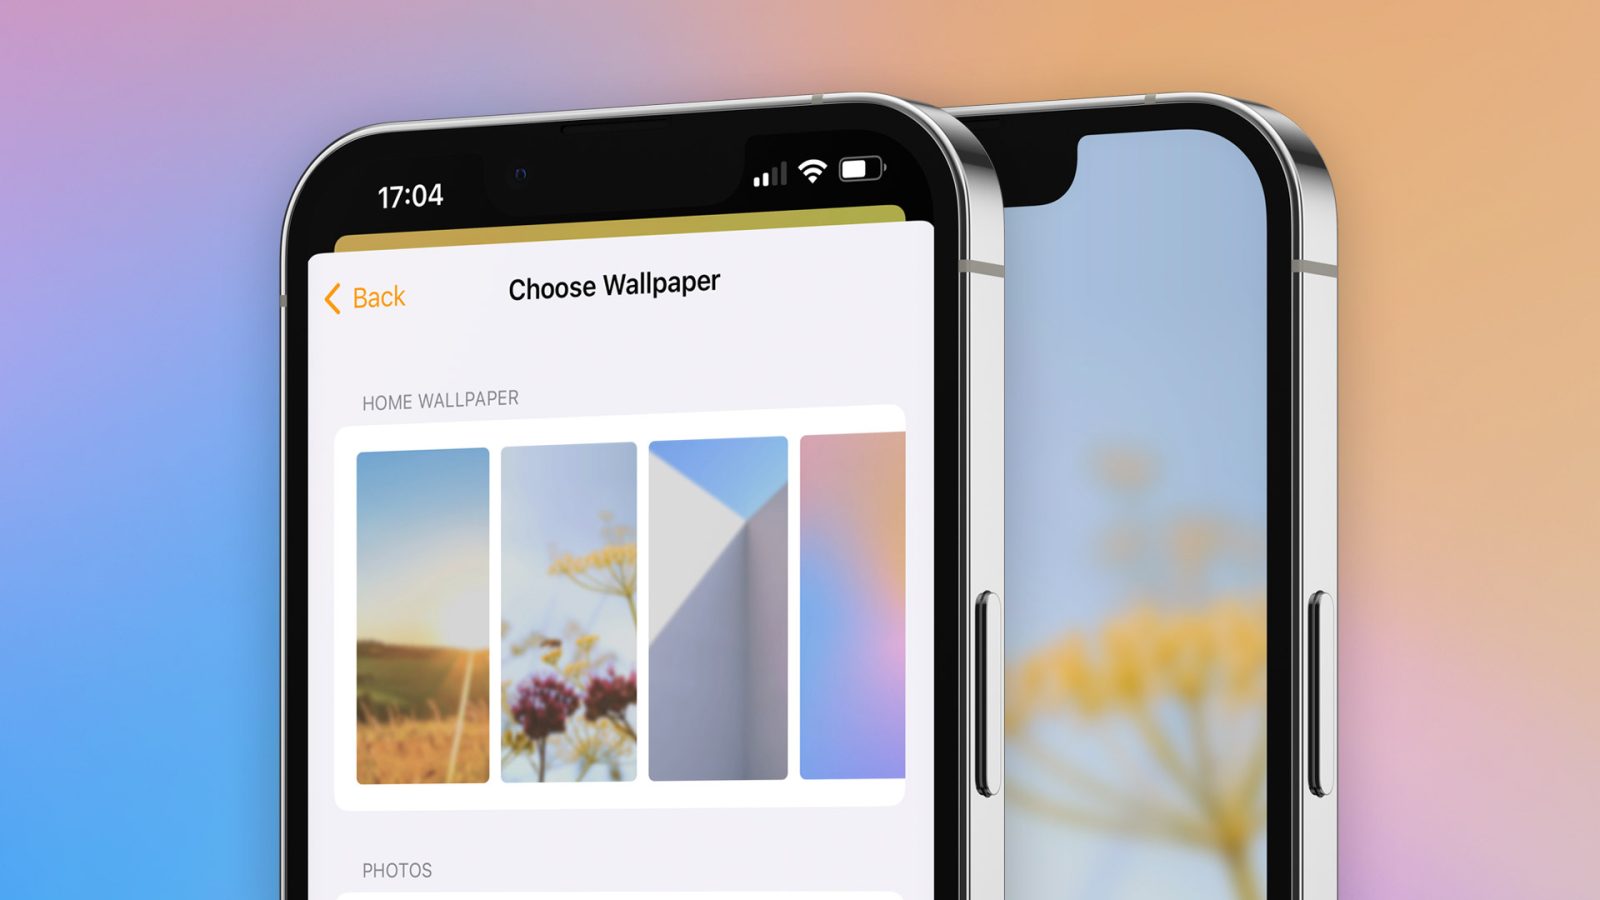 iOS 16 brings new wallpapers for the Home app, and you can download them here